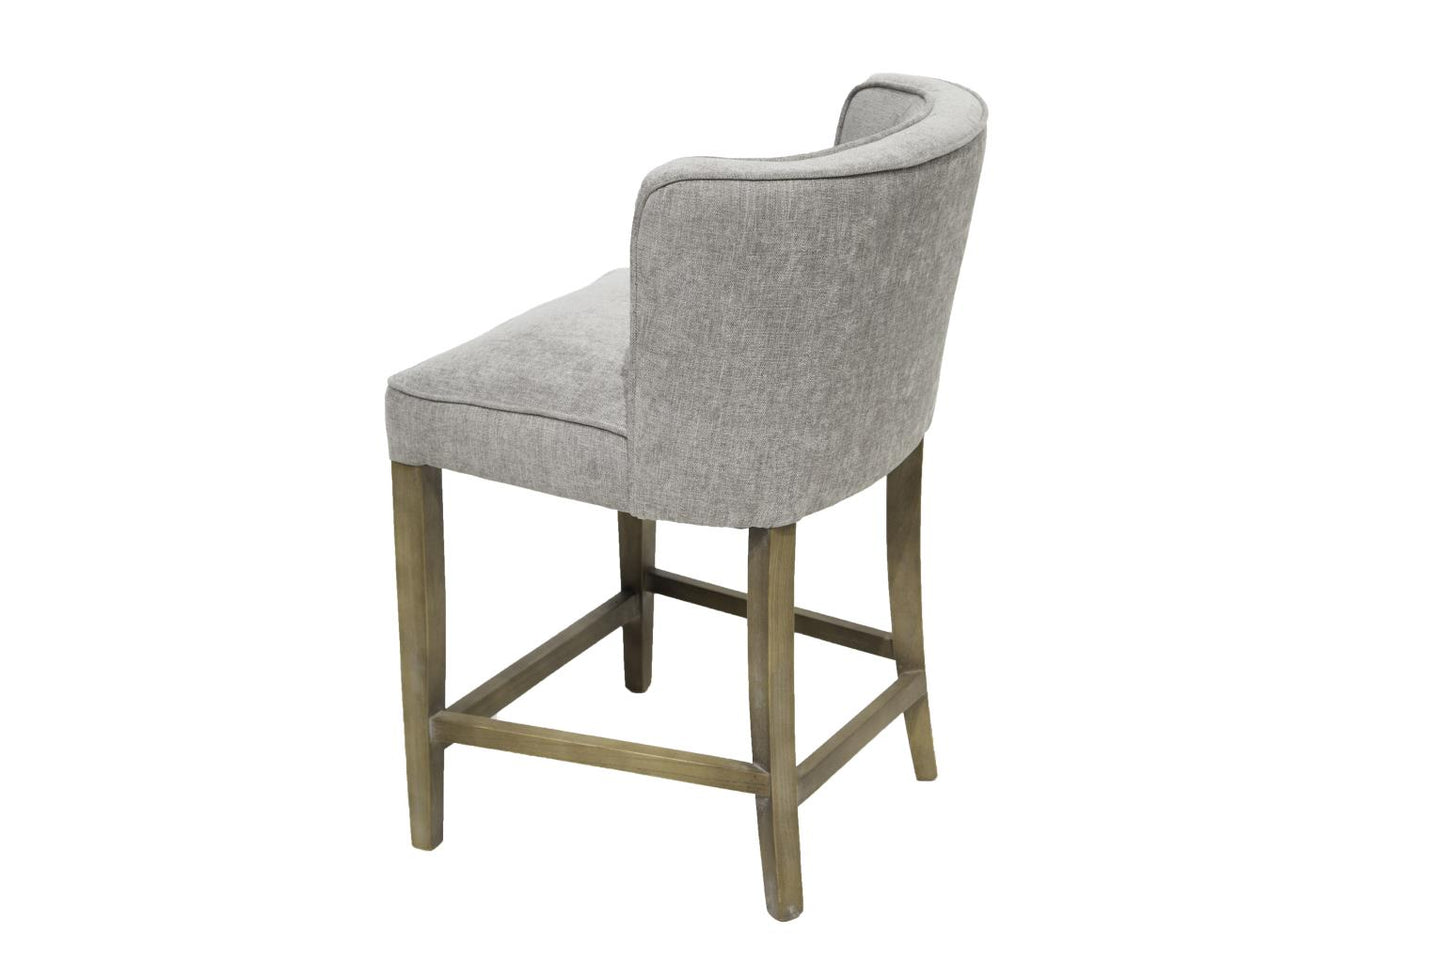 Nest Charlie Counter Stool Grey Wash / Anew Grey (3 Piece Set) 1610550